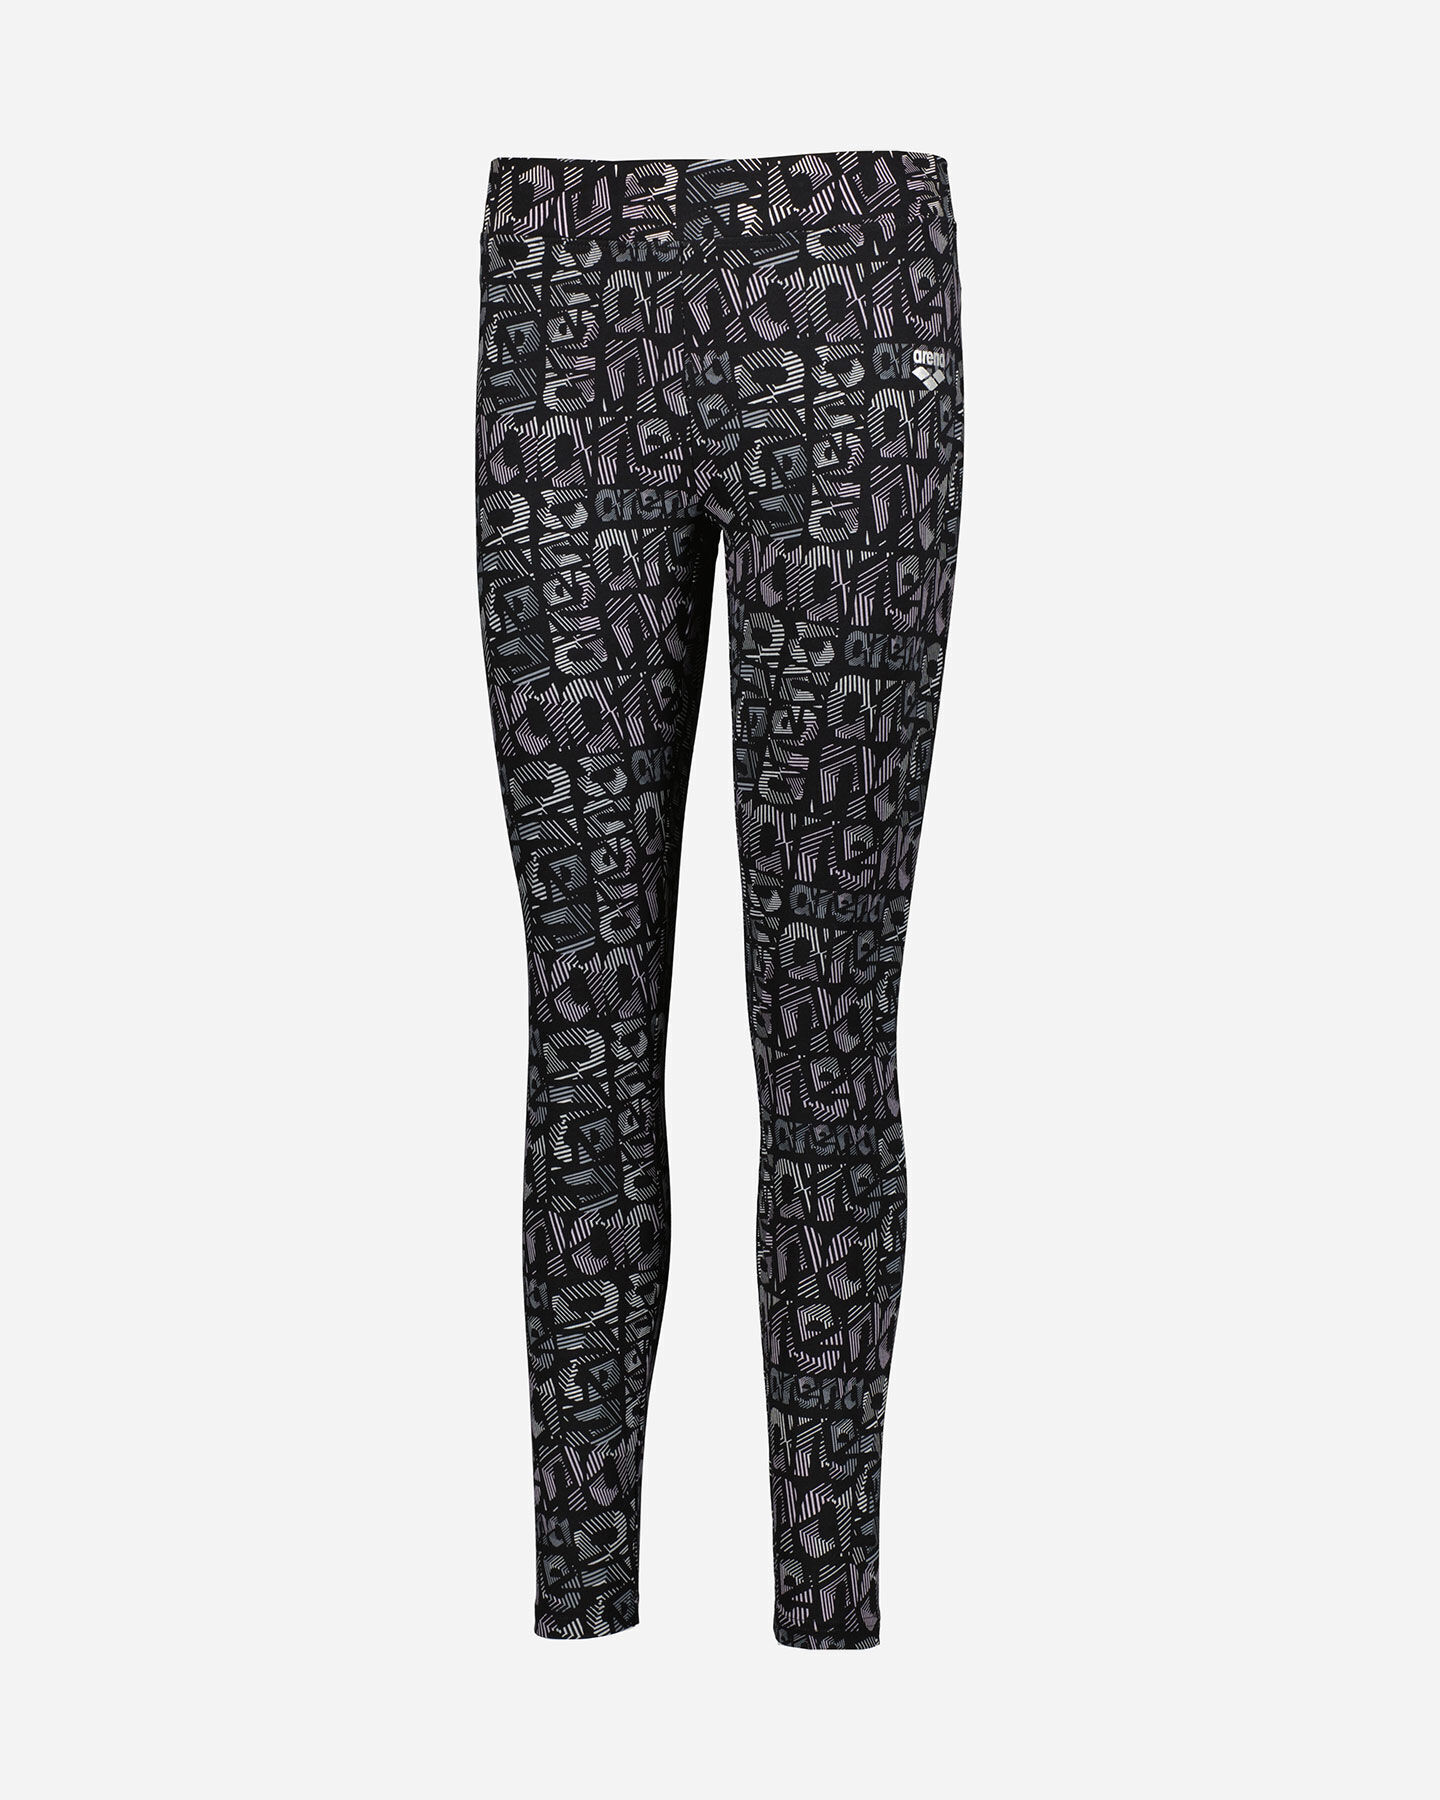  Leggings ARENA BASIC ATHLETICS LETTERS JSTRETCH W S4094338|AOP/050|S scatto 4